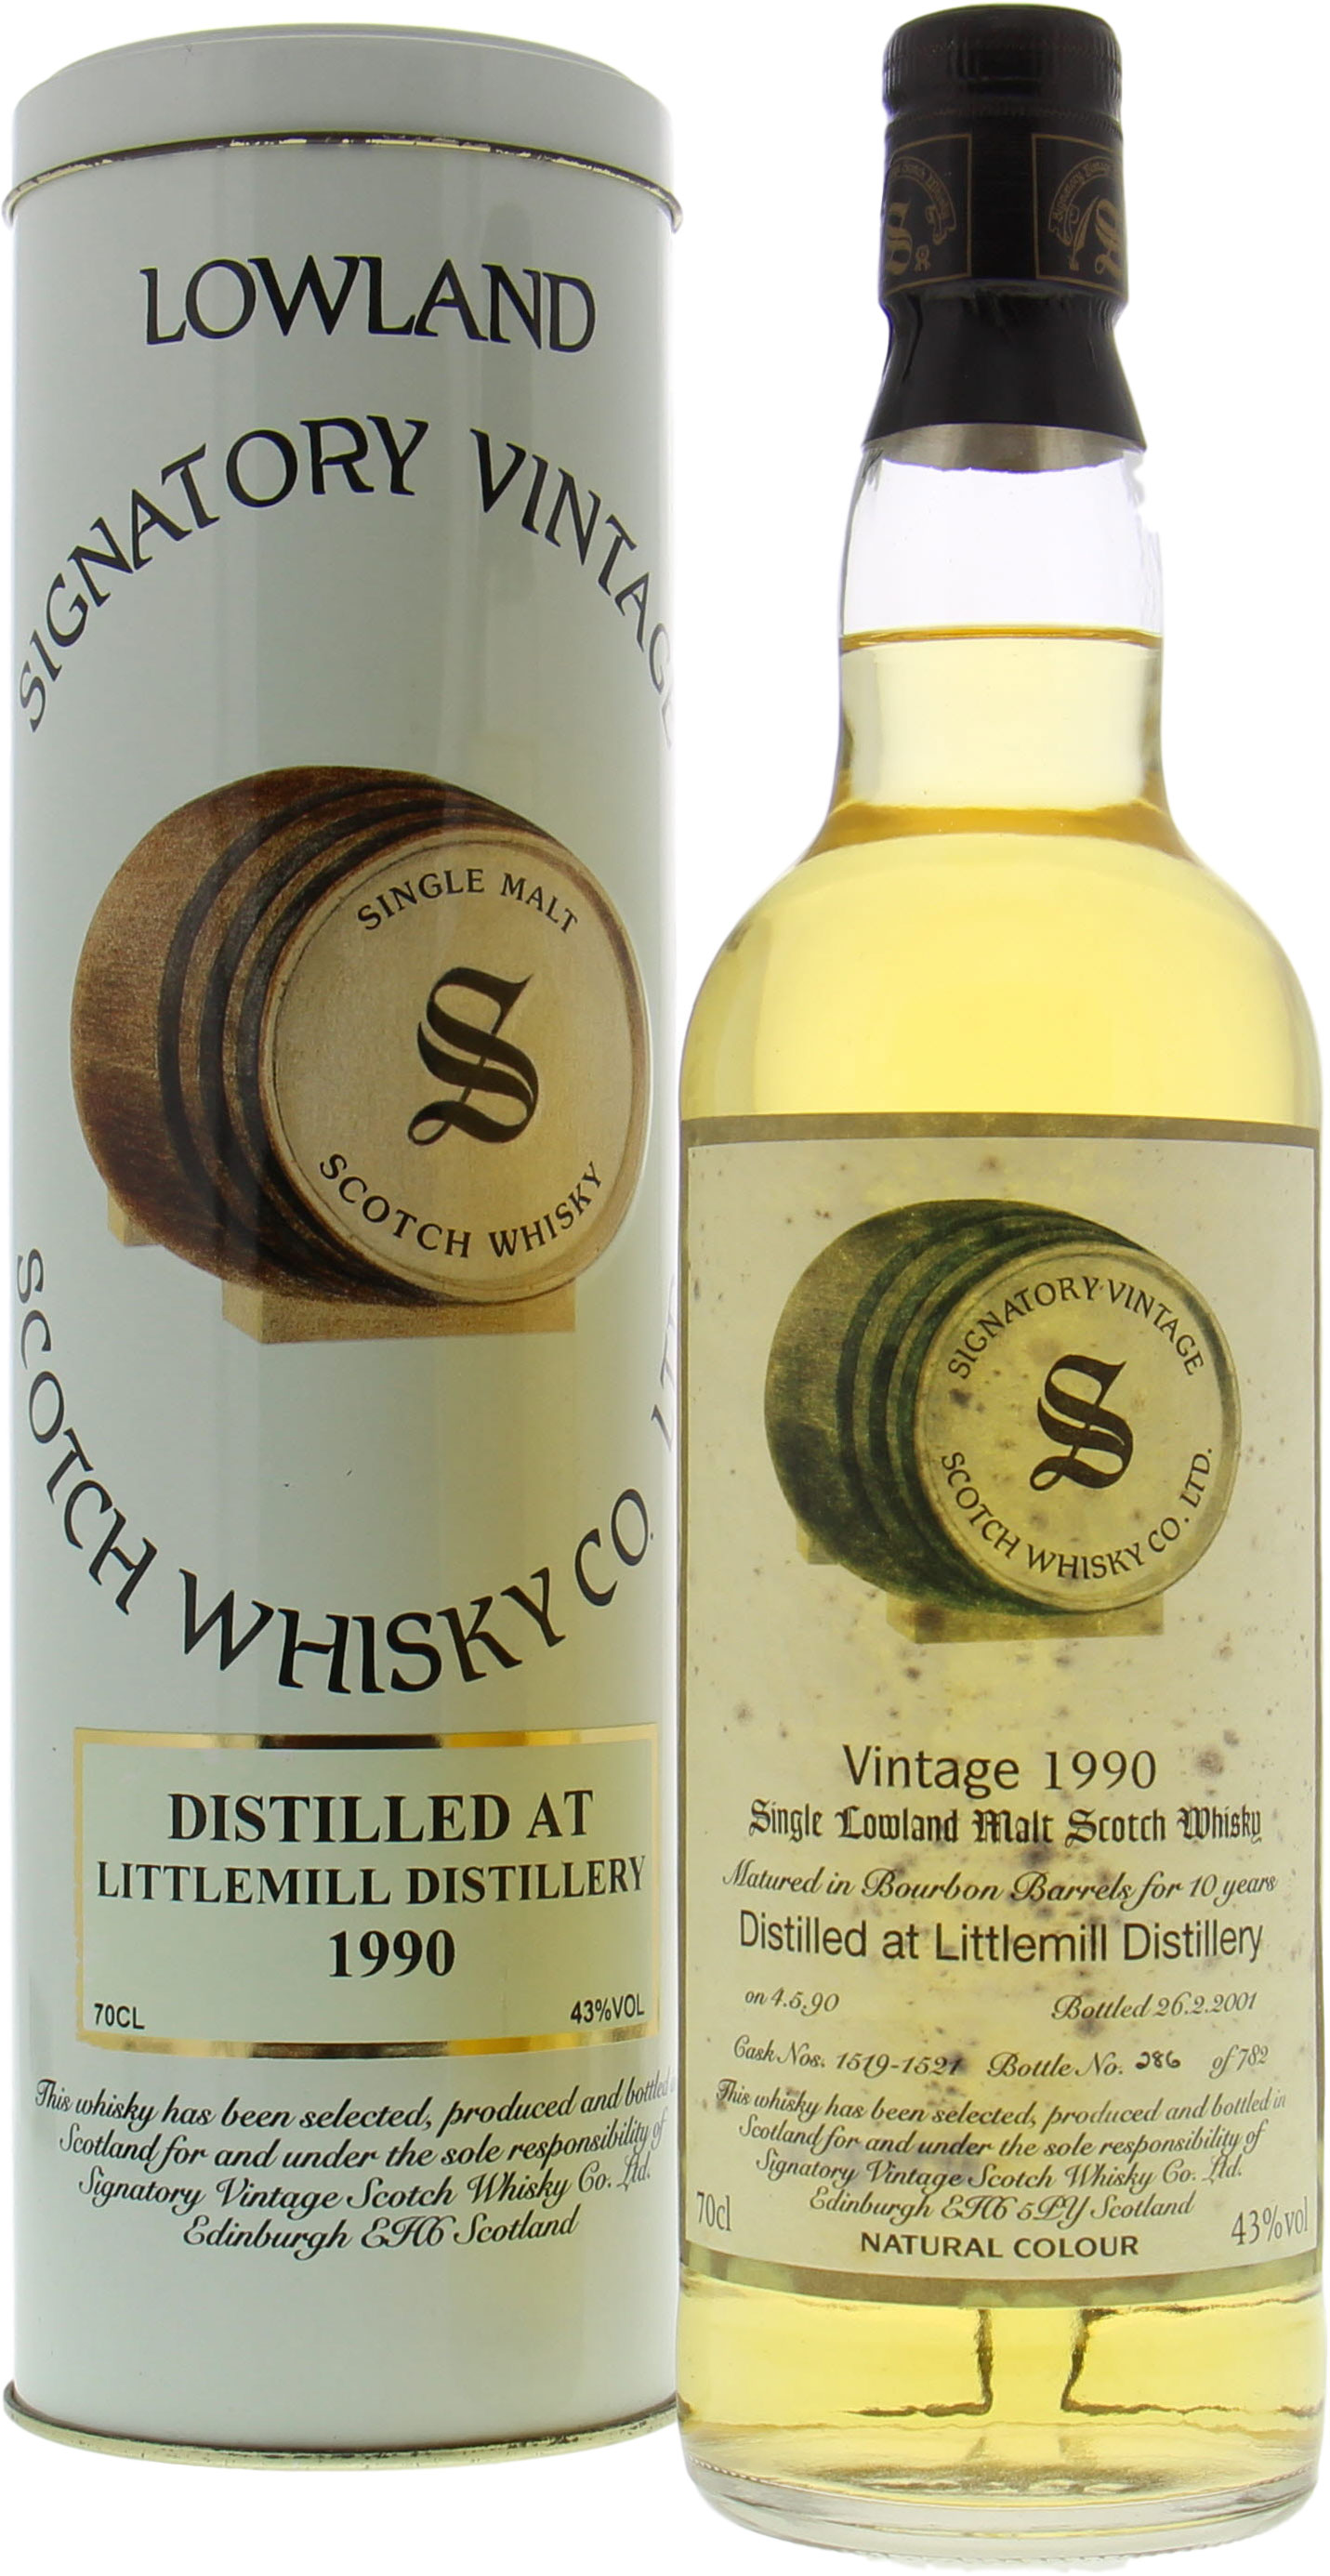 Littlemill - Signatory Vintage Collection Cask 1519-1521 43% 1990 In Original Container